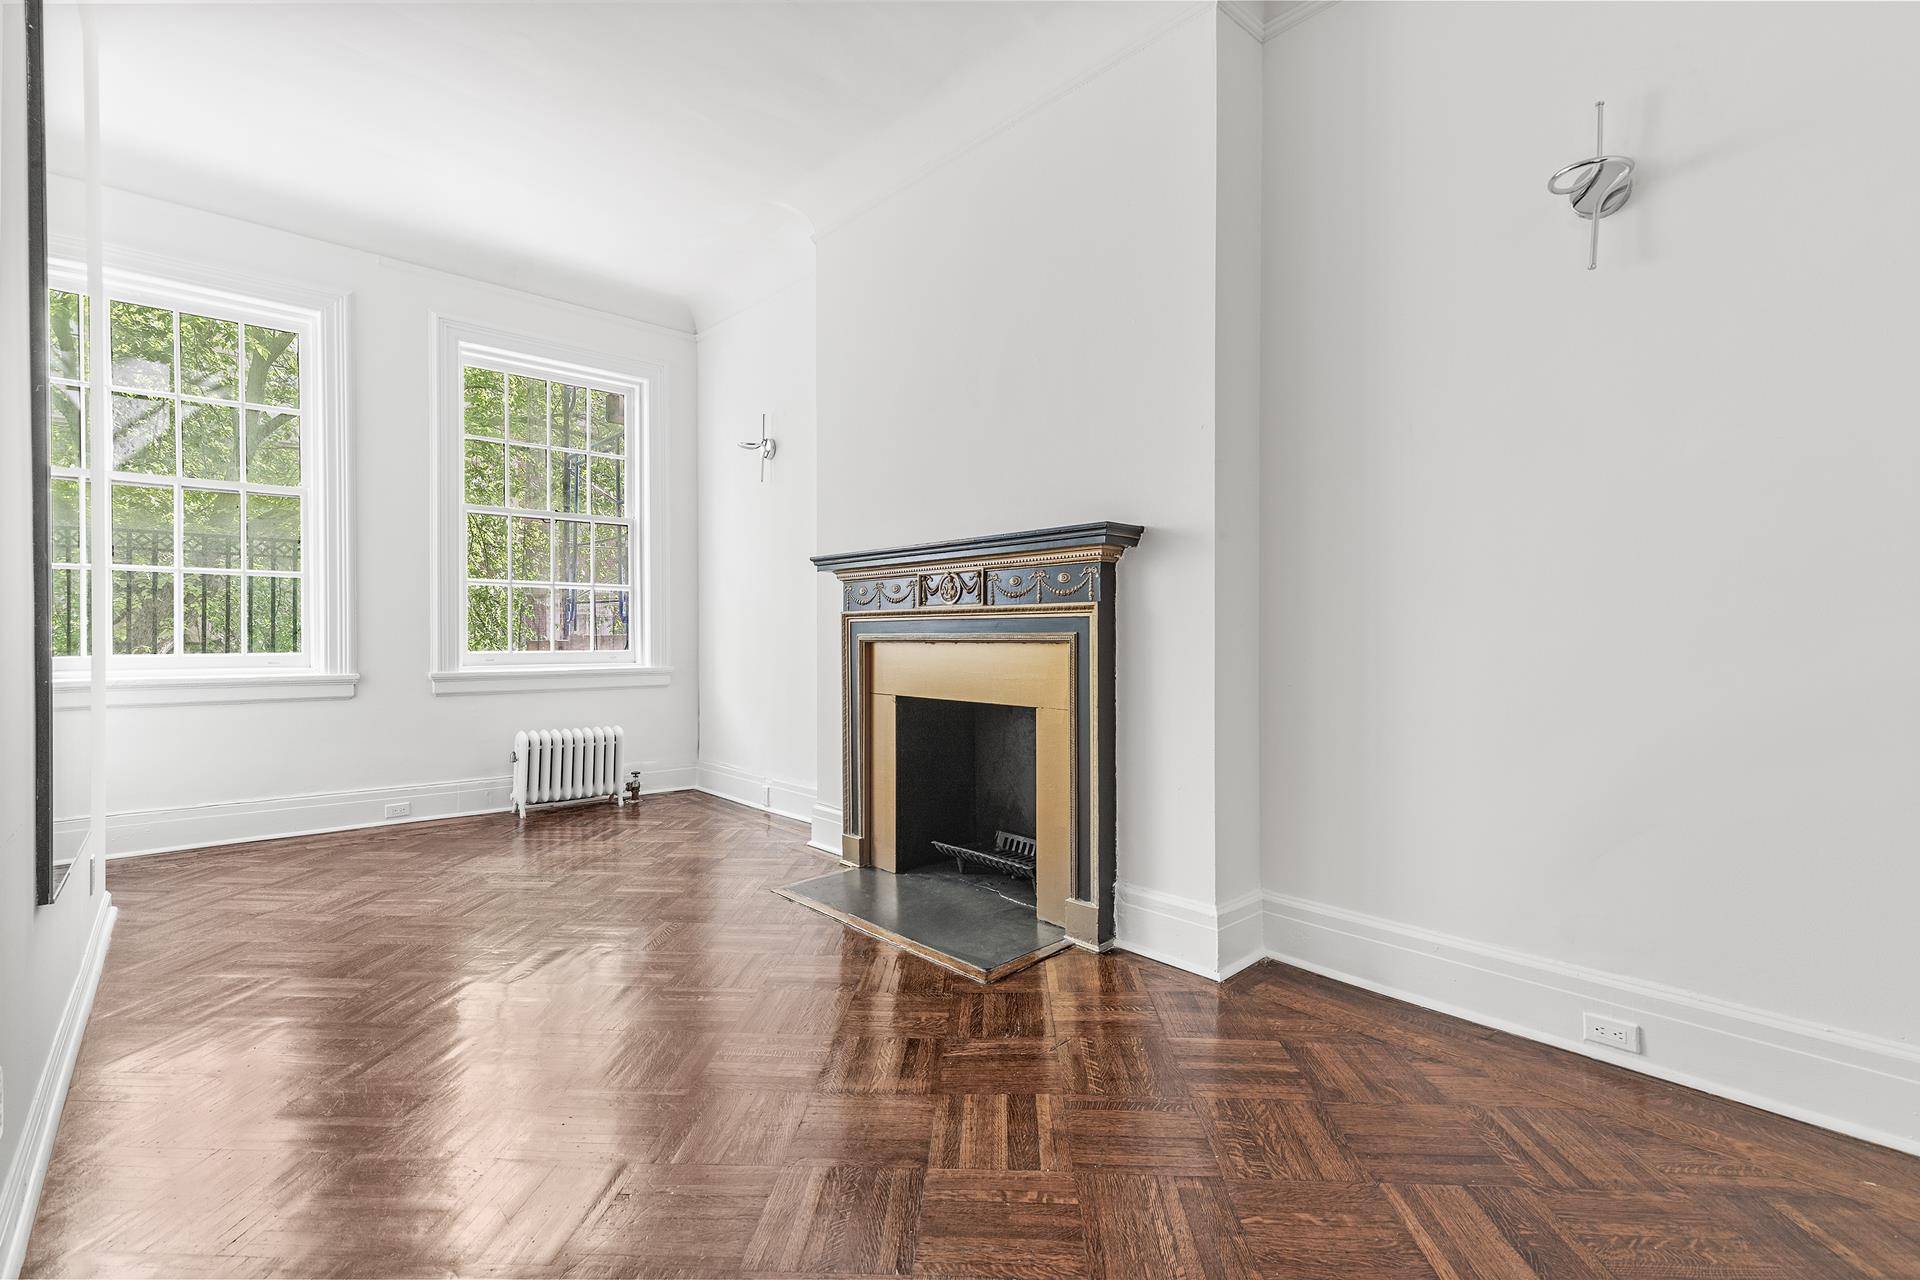 Newly listed converted one bedroom, pre war gem on a beautiful tree lined street on the Upper East Side.